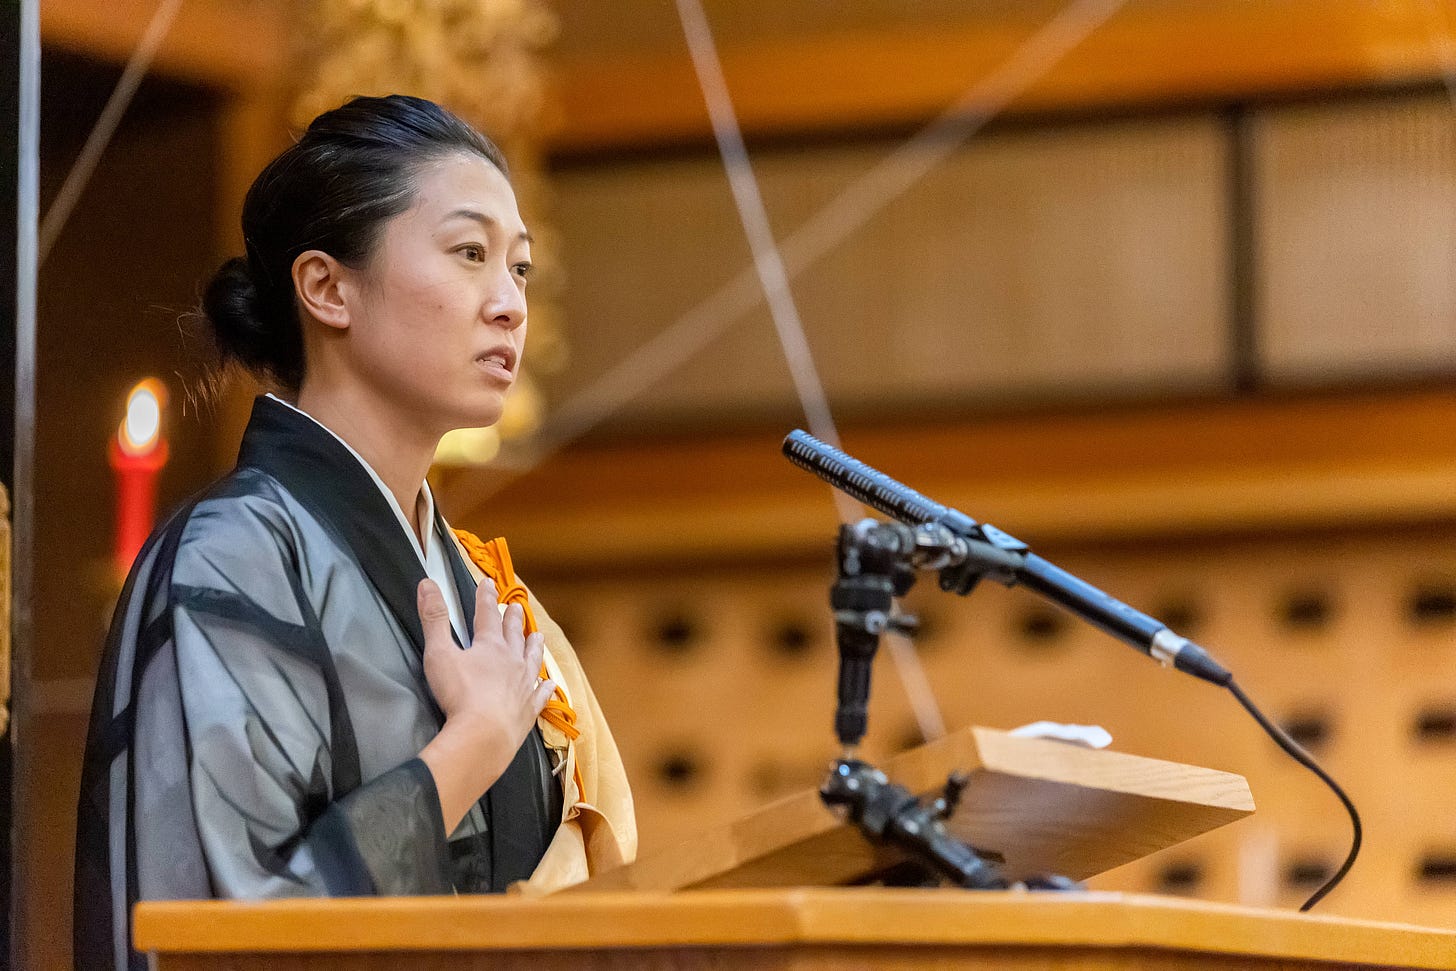 A Korean American woman speaking at a lectern, with her hand on her heart.